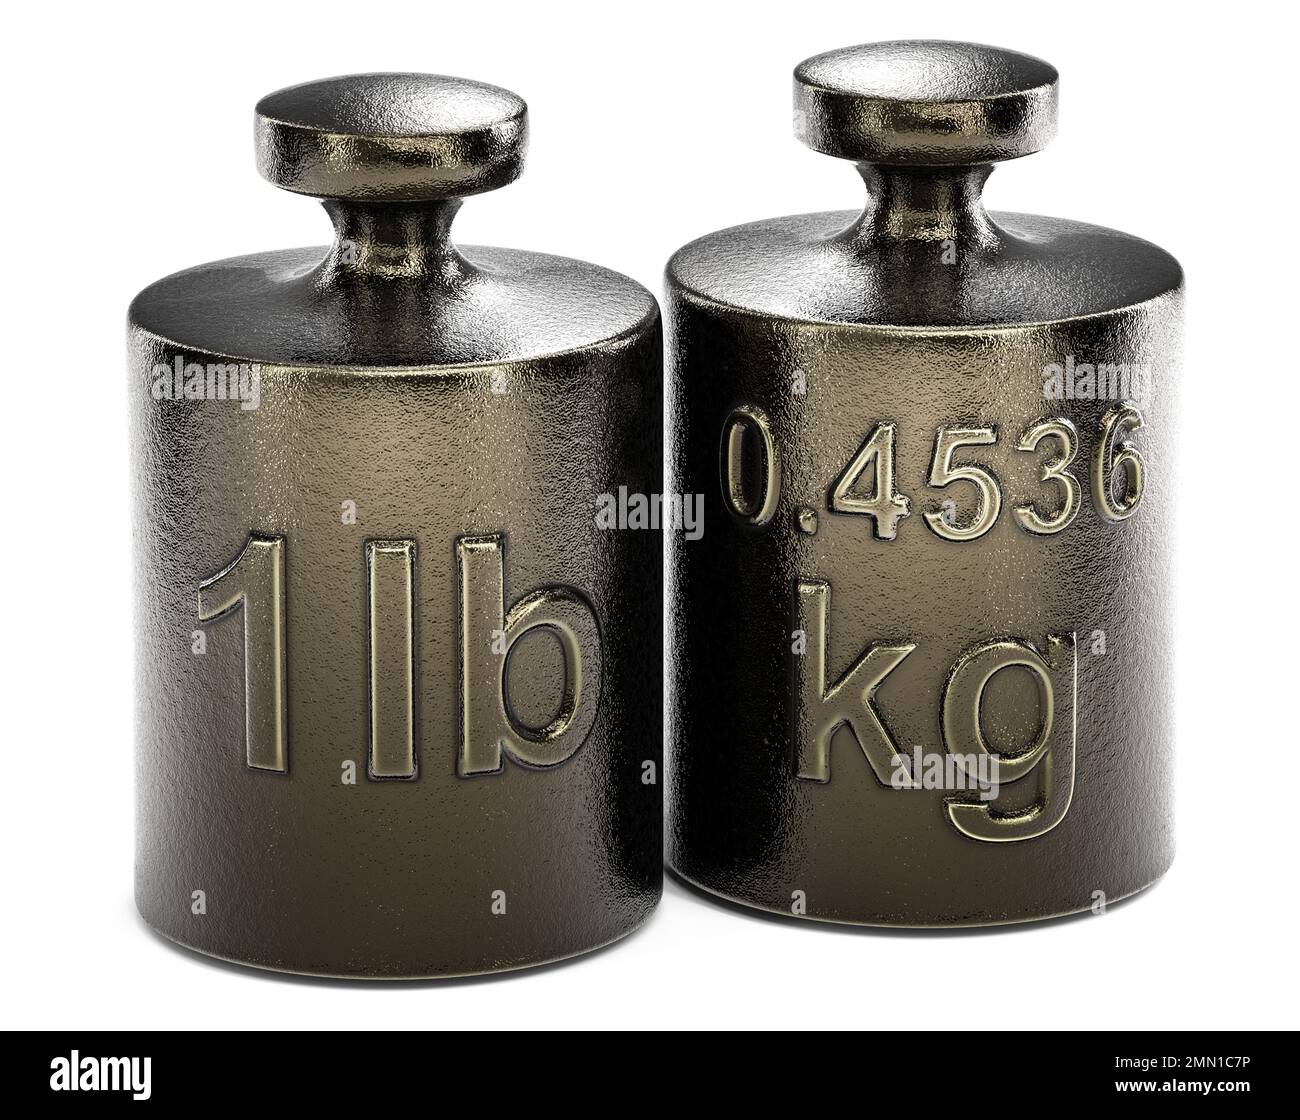 Convert one pound to kilograms. Weight with 1 lb and another one with 0.4536 kg over white background, 3d illustration. Stock Photo